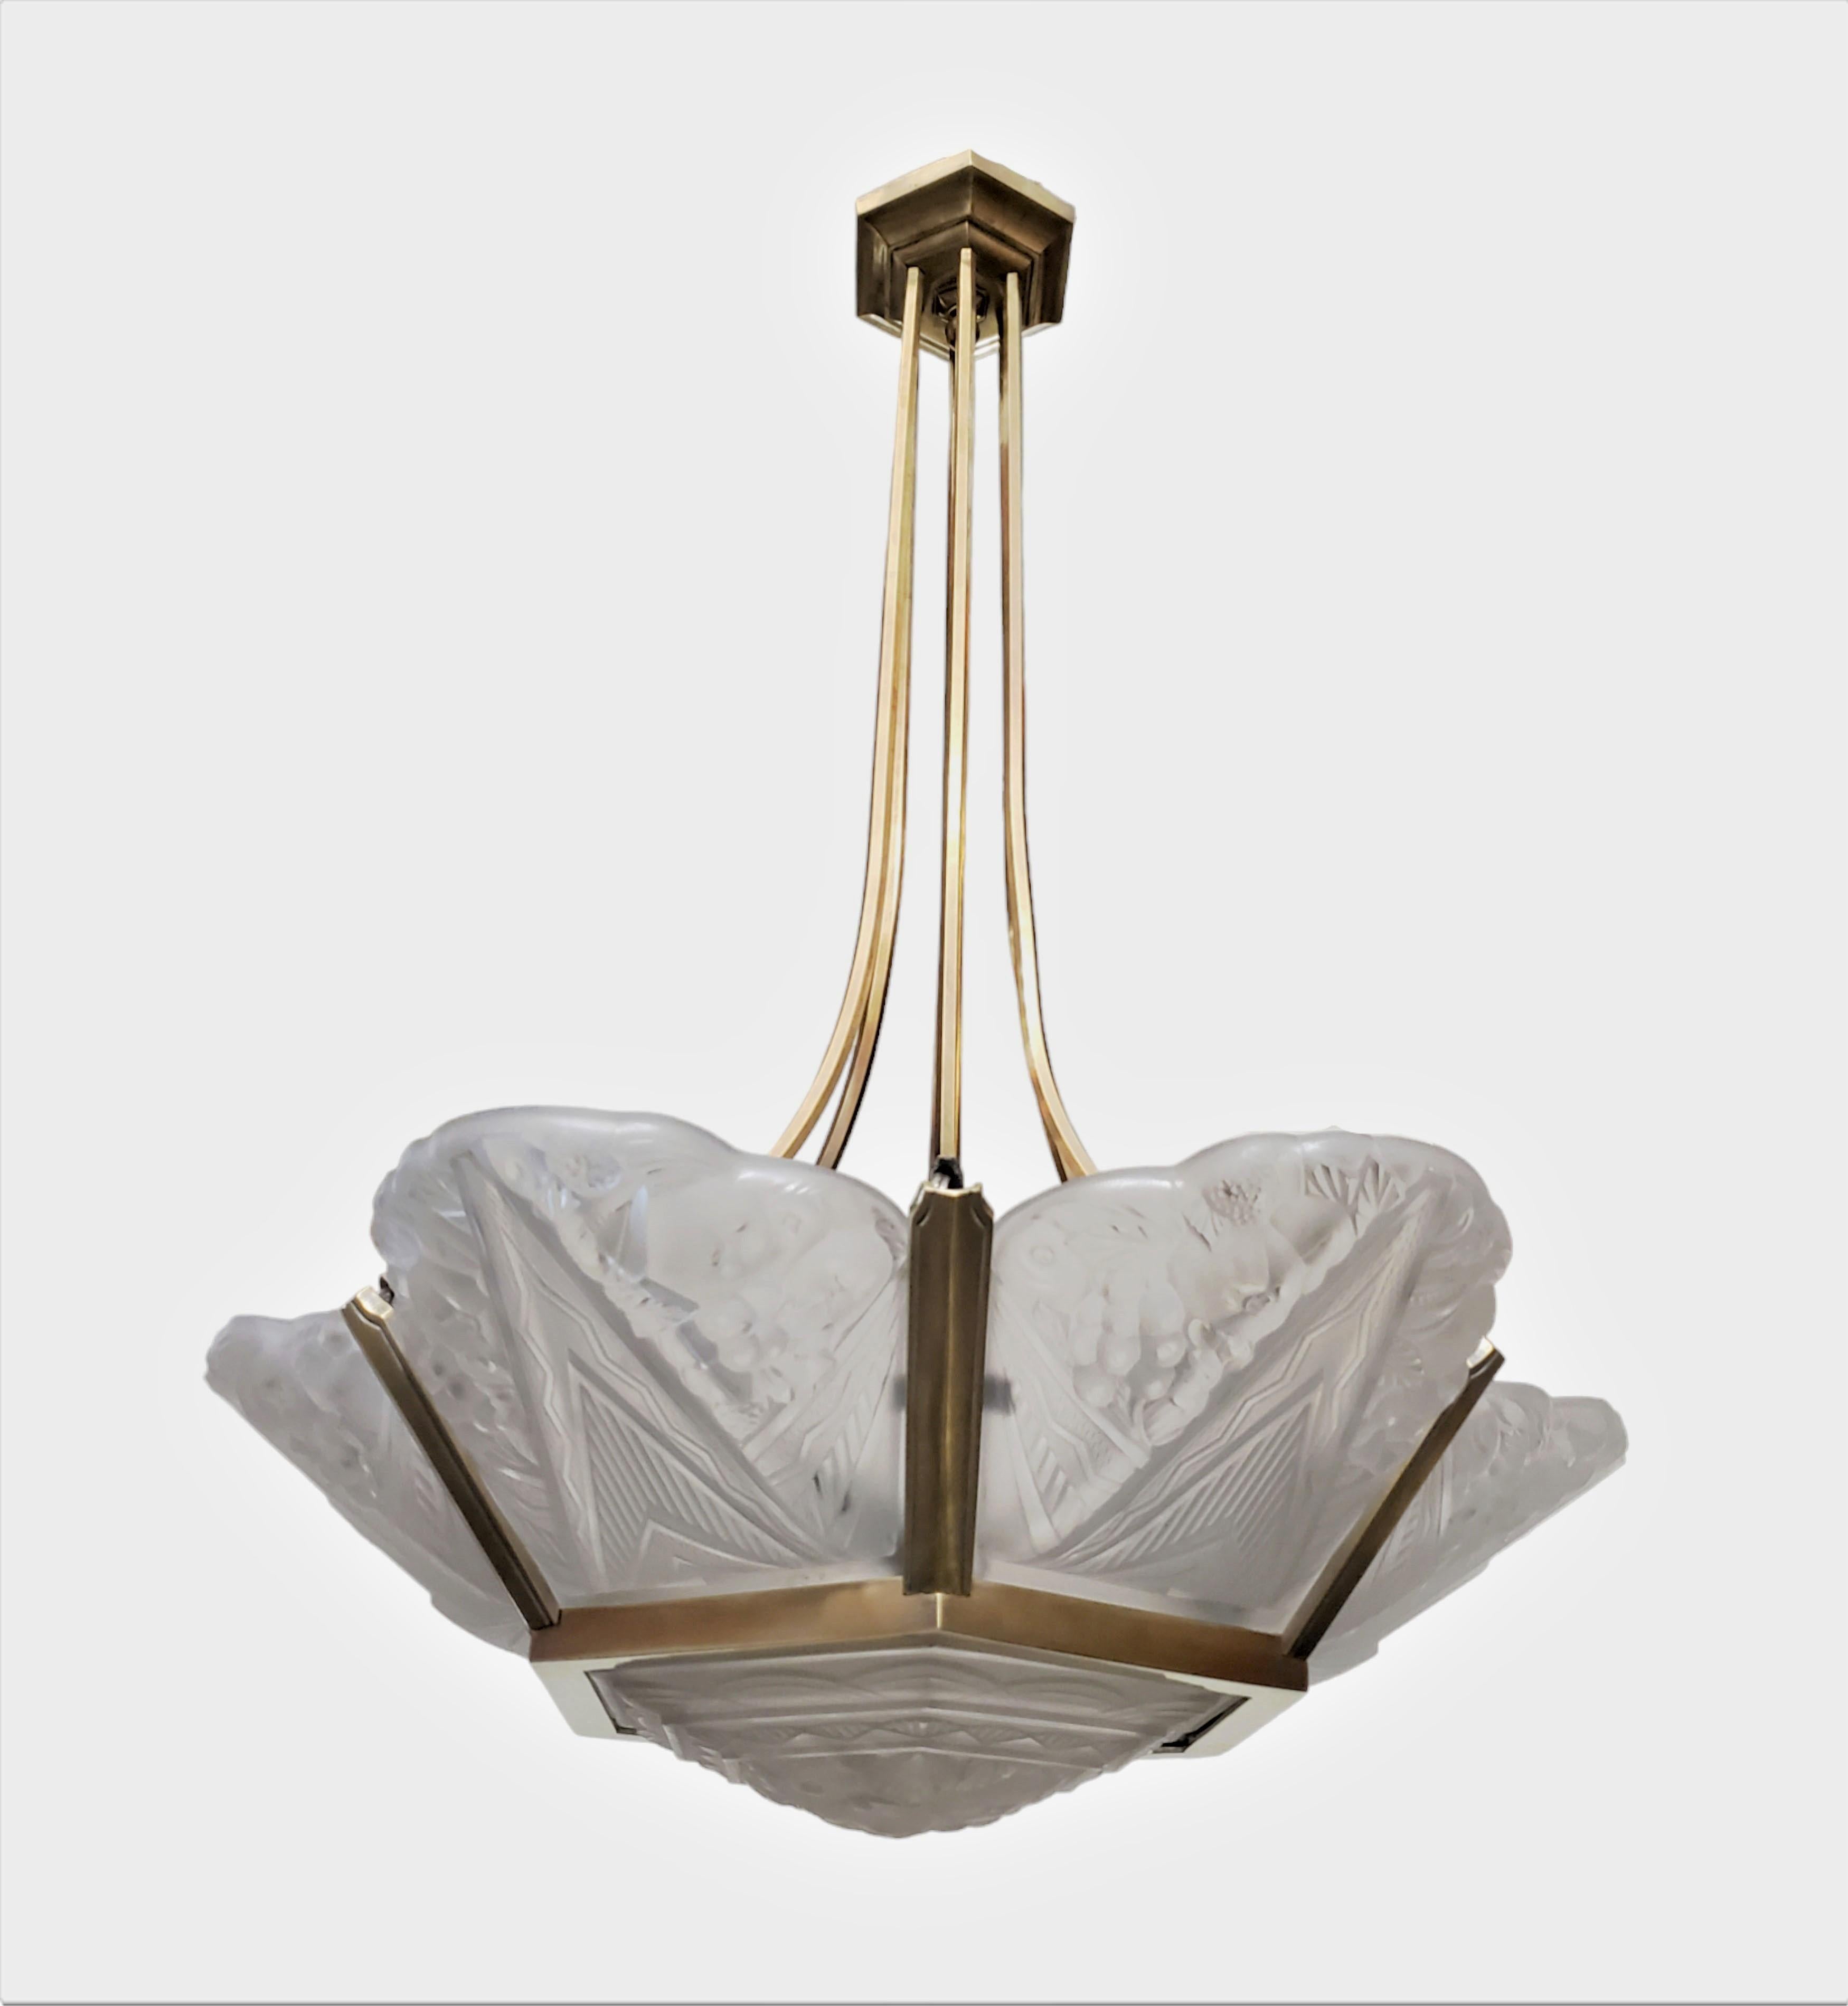 Original French Art Deco brass and art glass 6 panel + center chandelier -Sabino For Sale 7